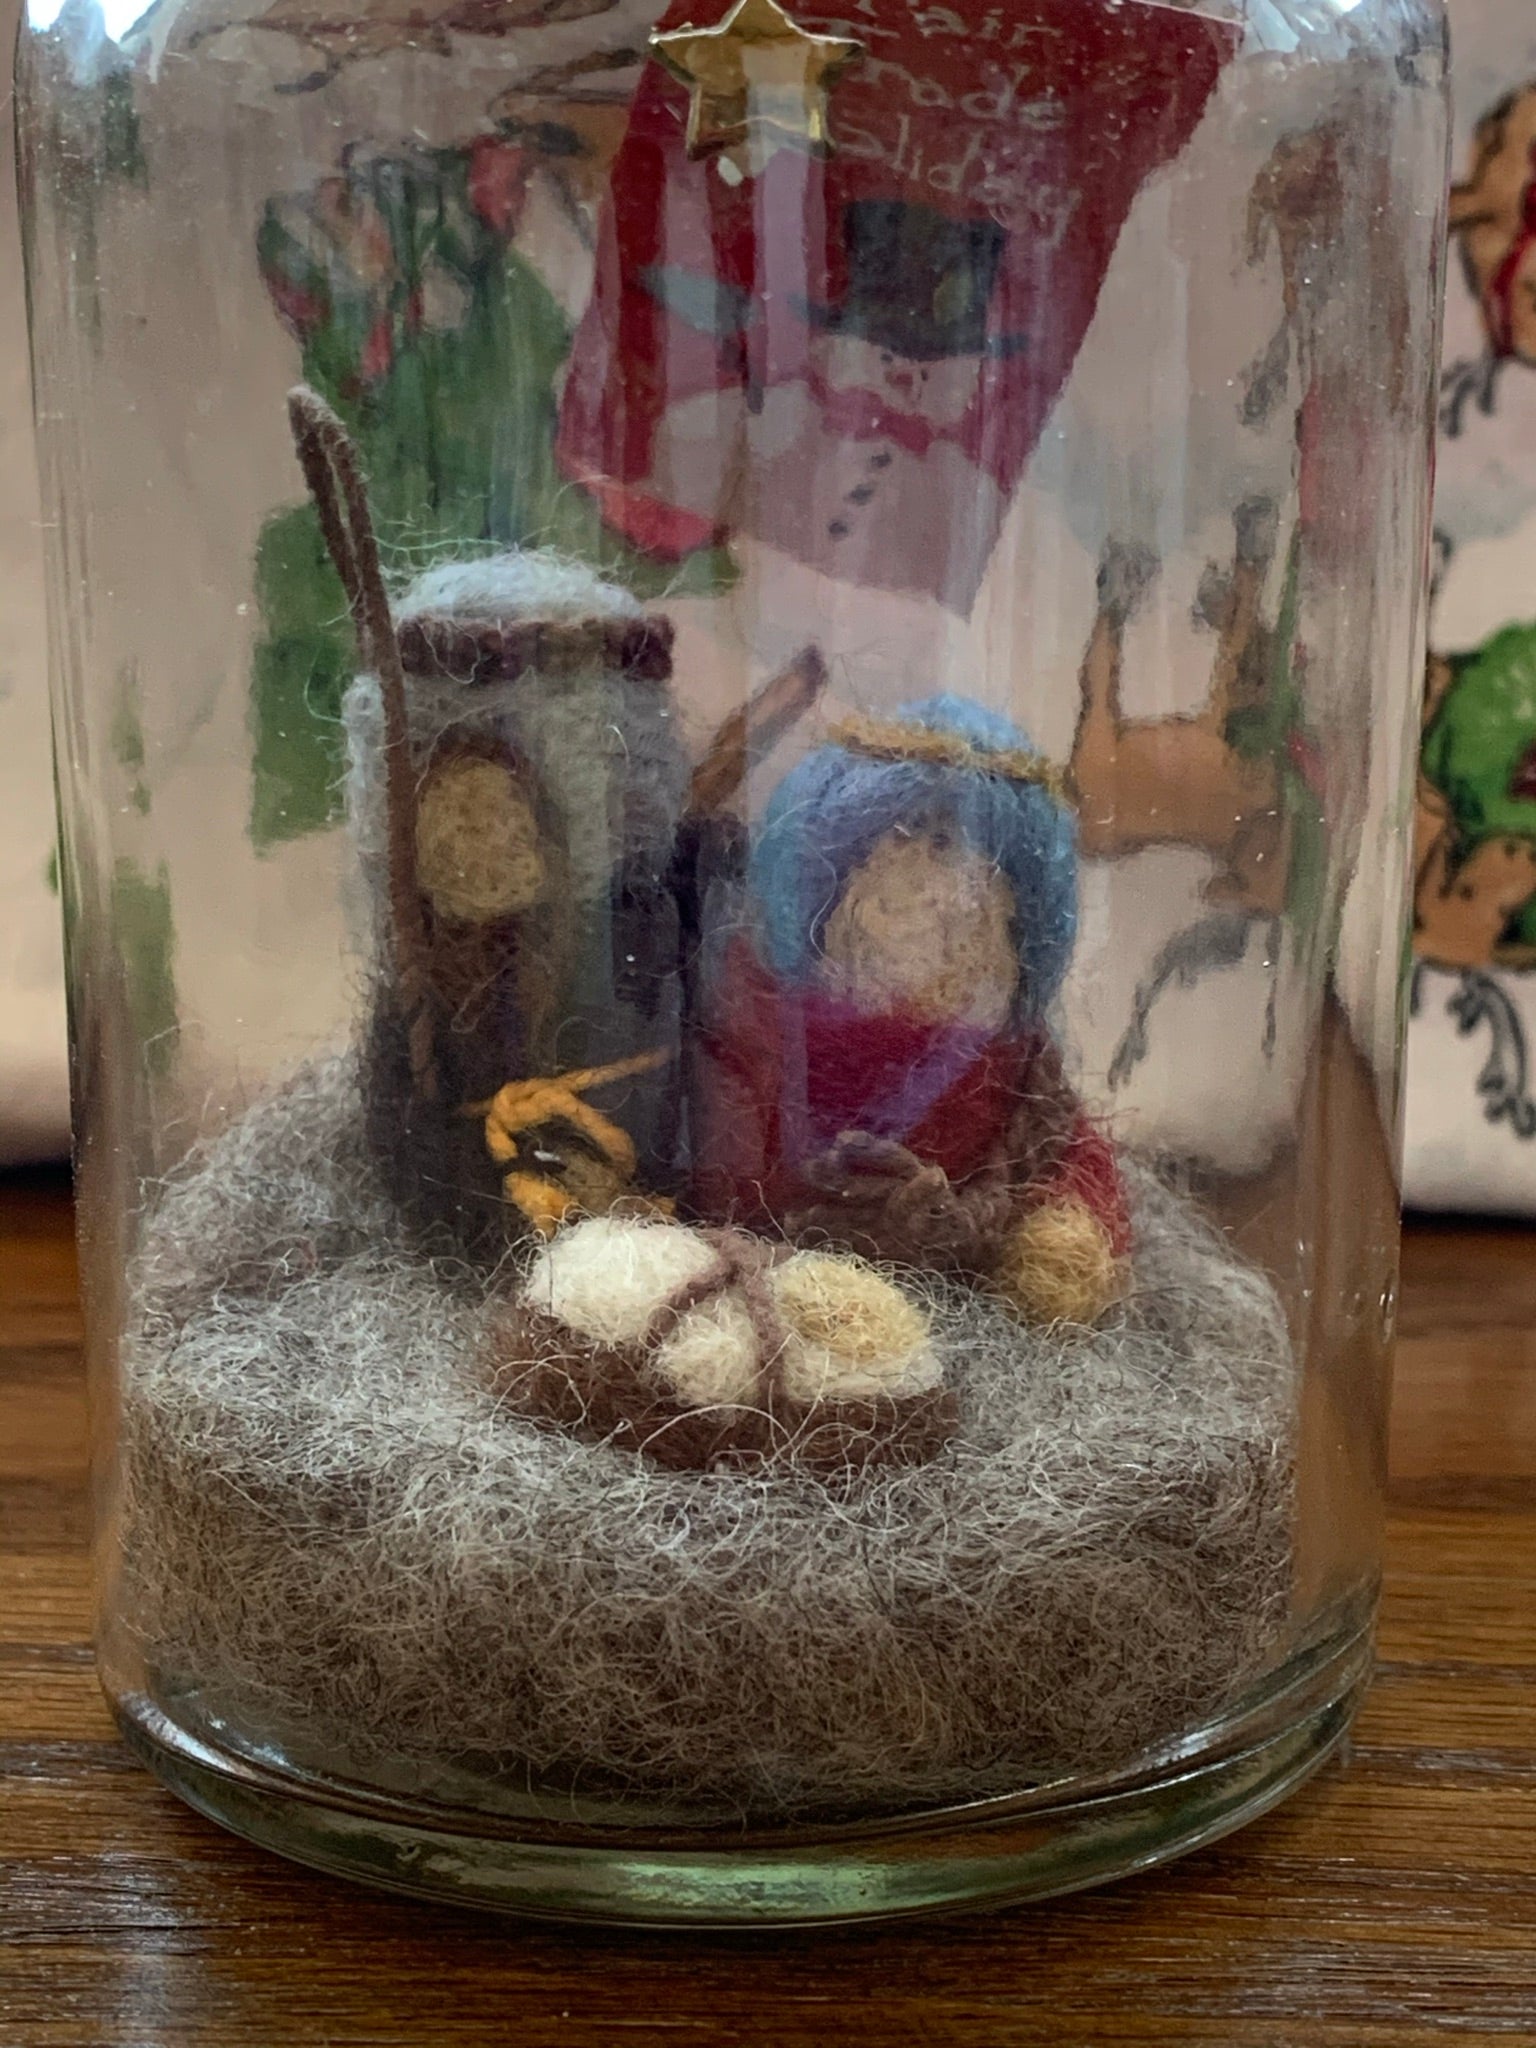 This close-up of the Nativity story jar Christmas ornament displays Mary, Joseph and baby Jesus with a star above them, sitting on the ground. They sit inside a corked apothecary bottle. The Nativity is made of 100% natural wool. The bottle is affixed with a metal wire for hanging, but can also be placed on a shelf or table top. Approximately 3"x1" (6.75" if you include the wire hanger). It comes with a fair trade home and and garden tag.